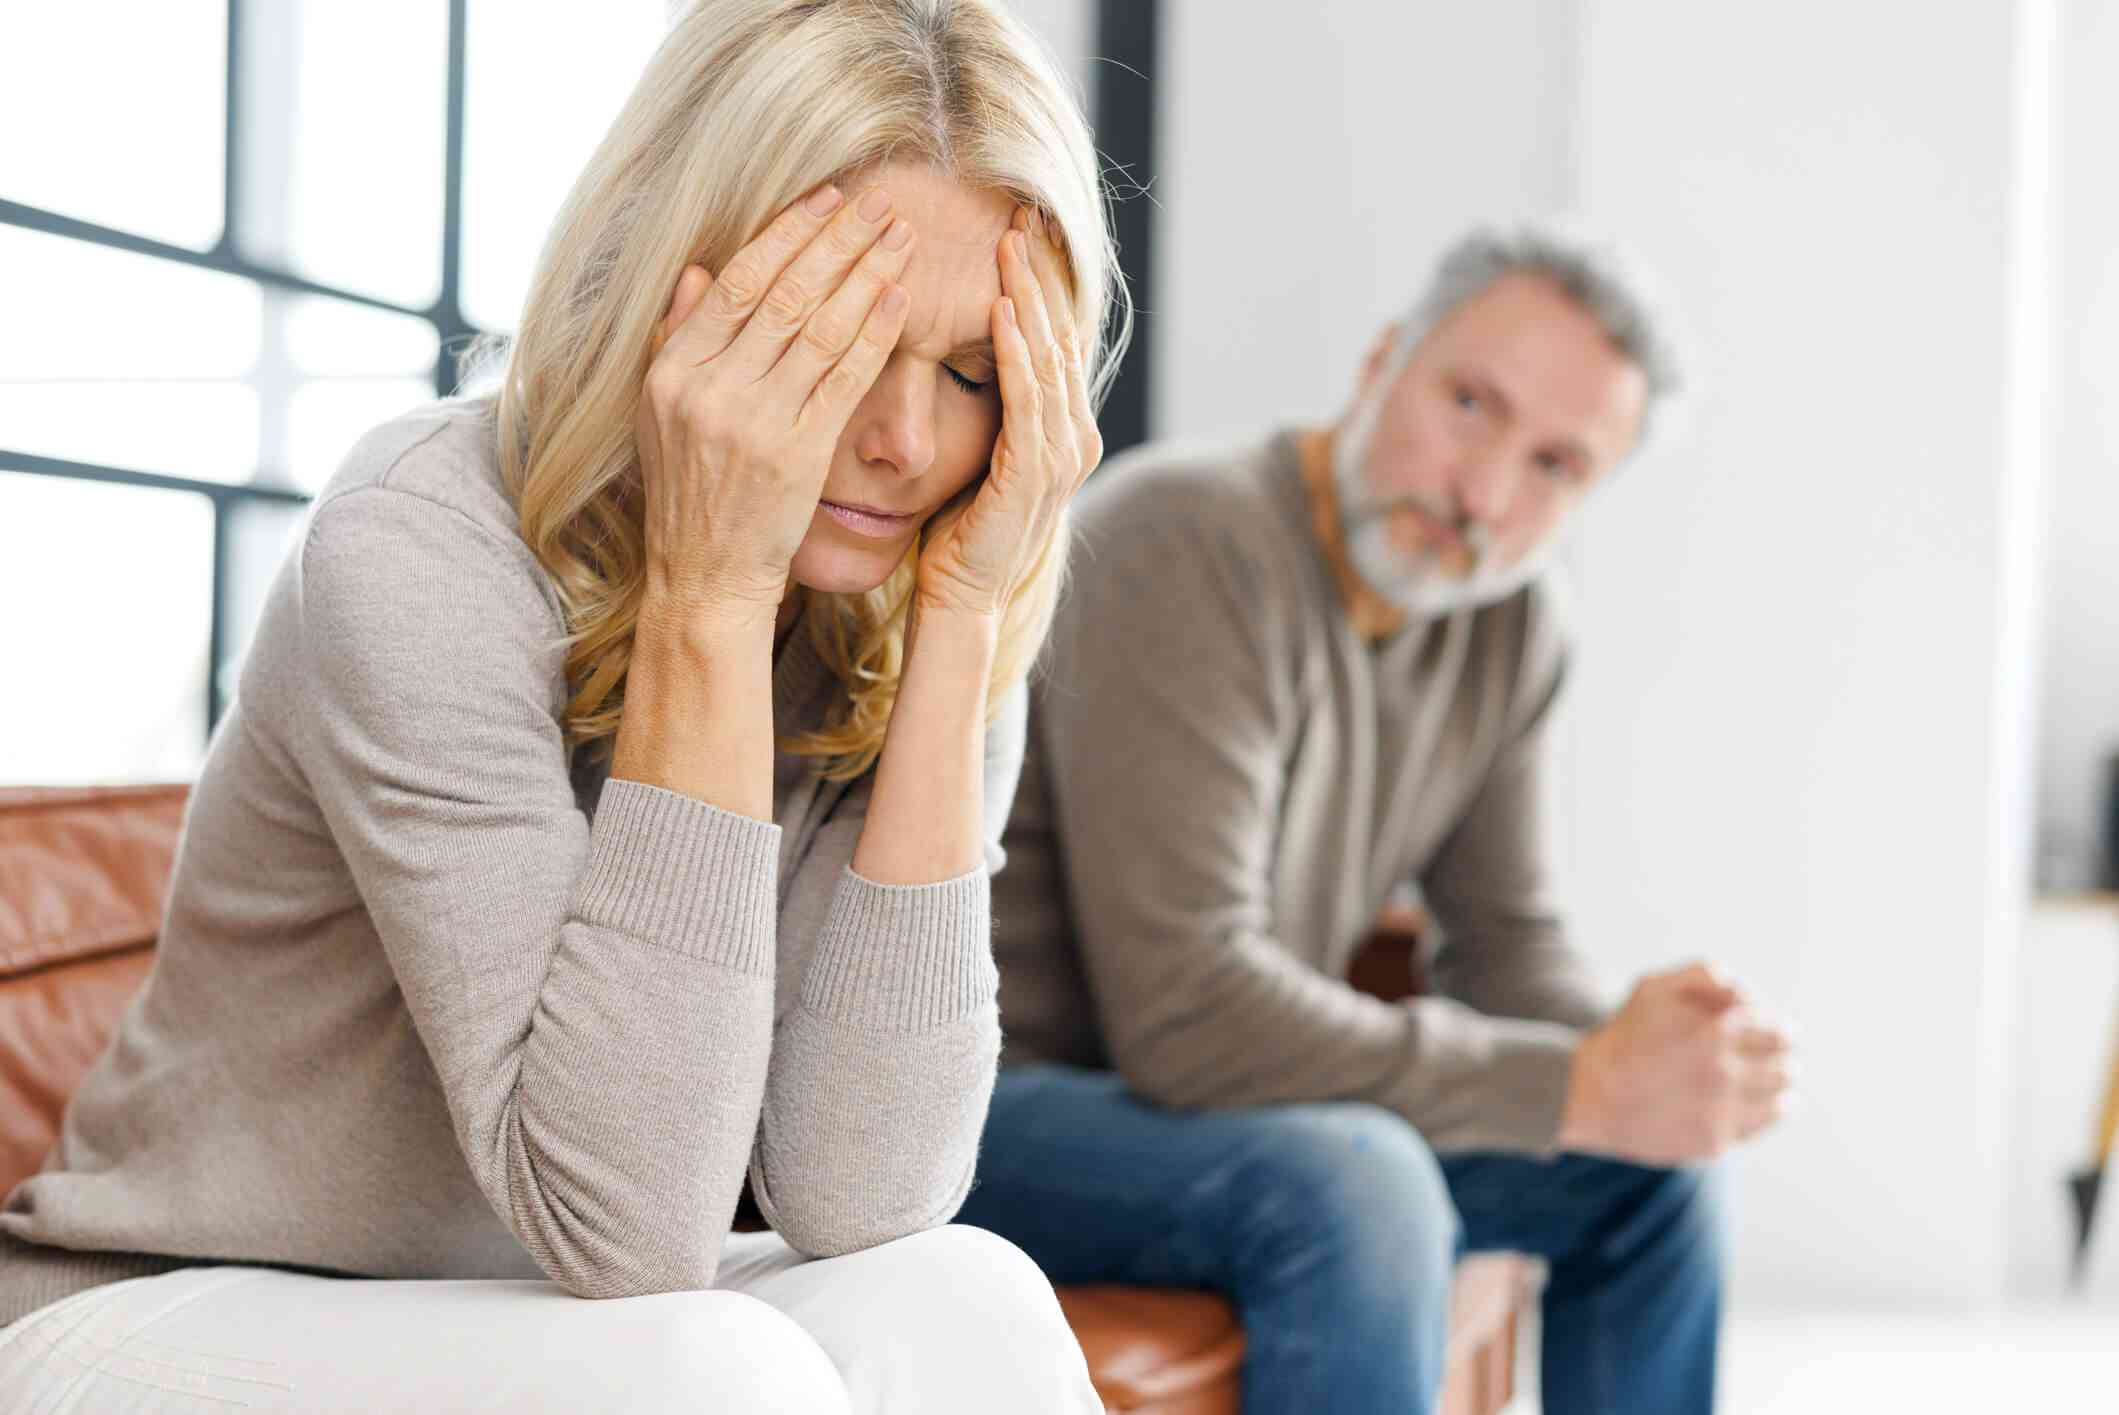 Husband With Anger Issues? Learn How Being Angry Can Ruin Your Marriage BetterHelp image